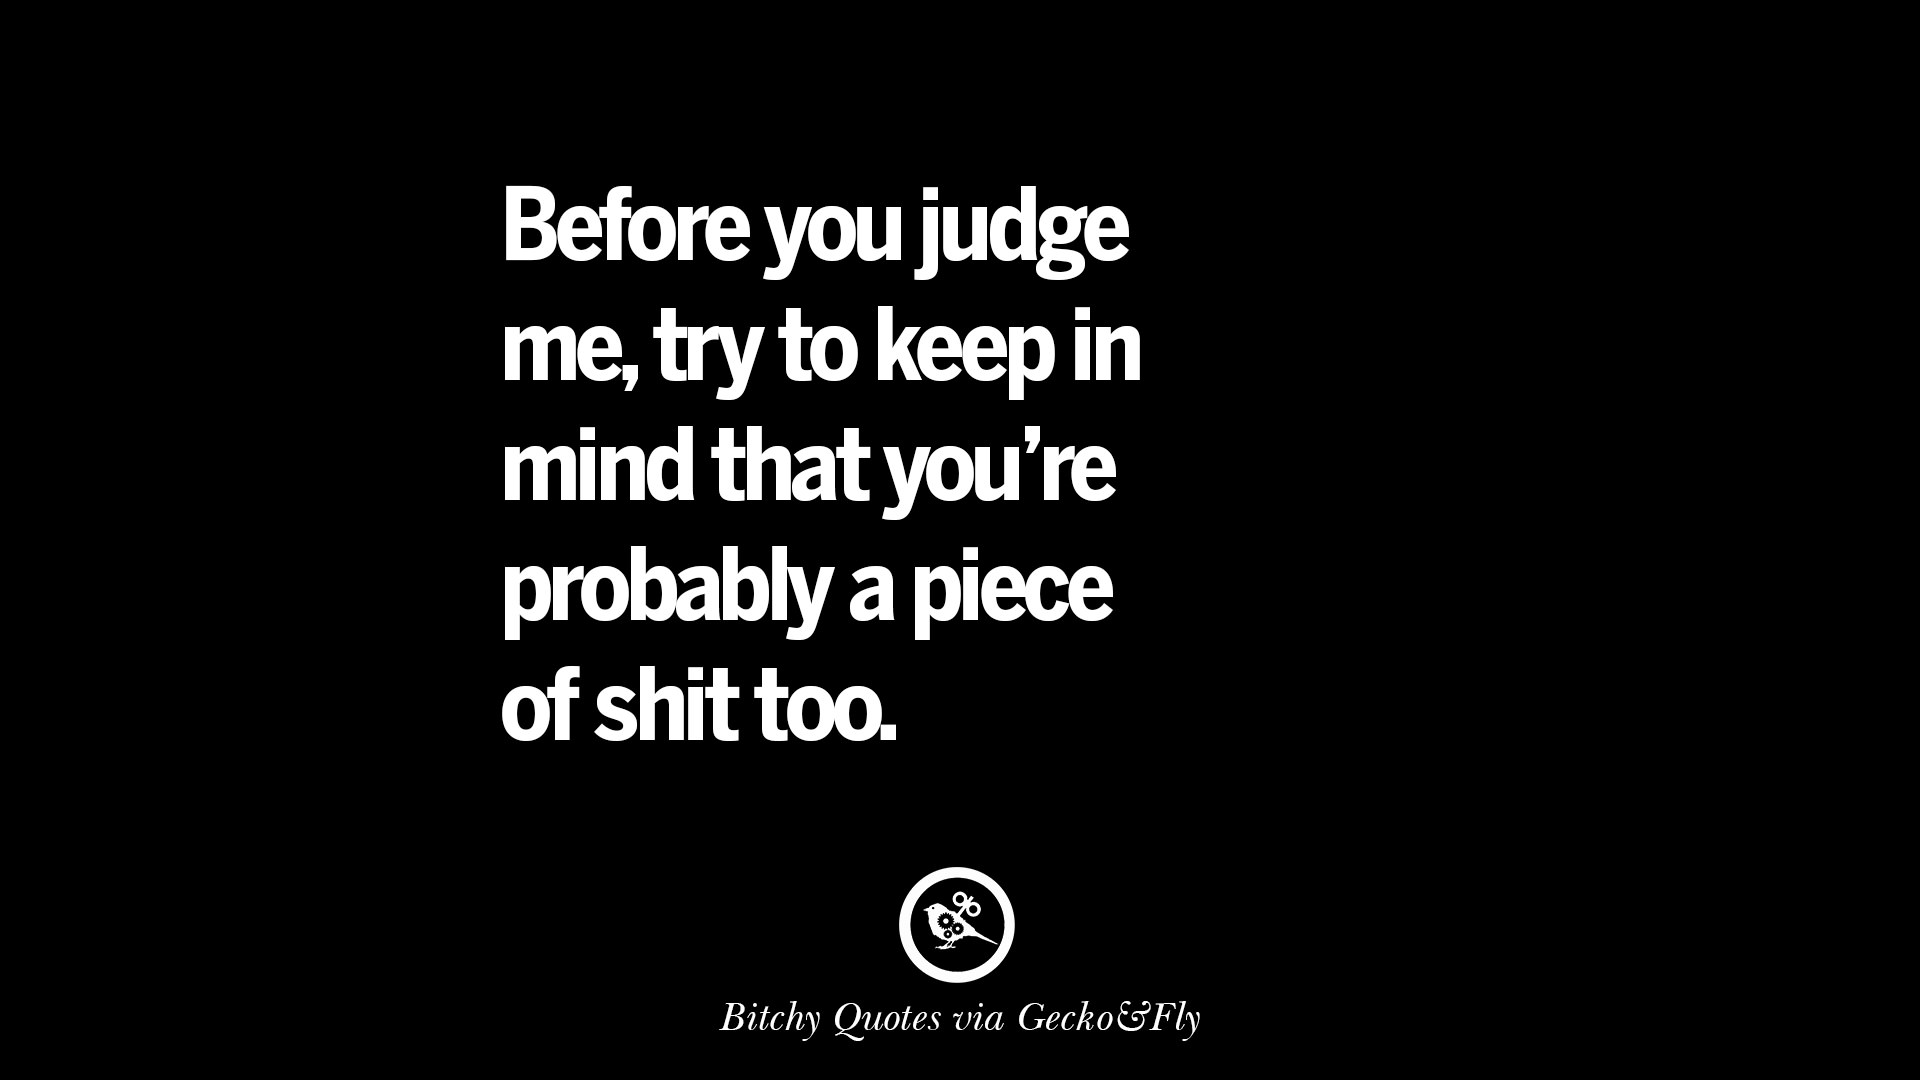 Before you judge me, try to keep in mind that you're probably a piece of shit too.